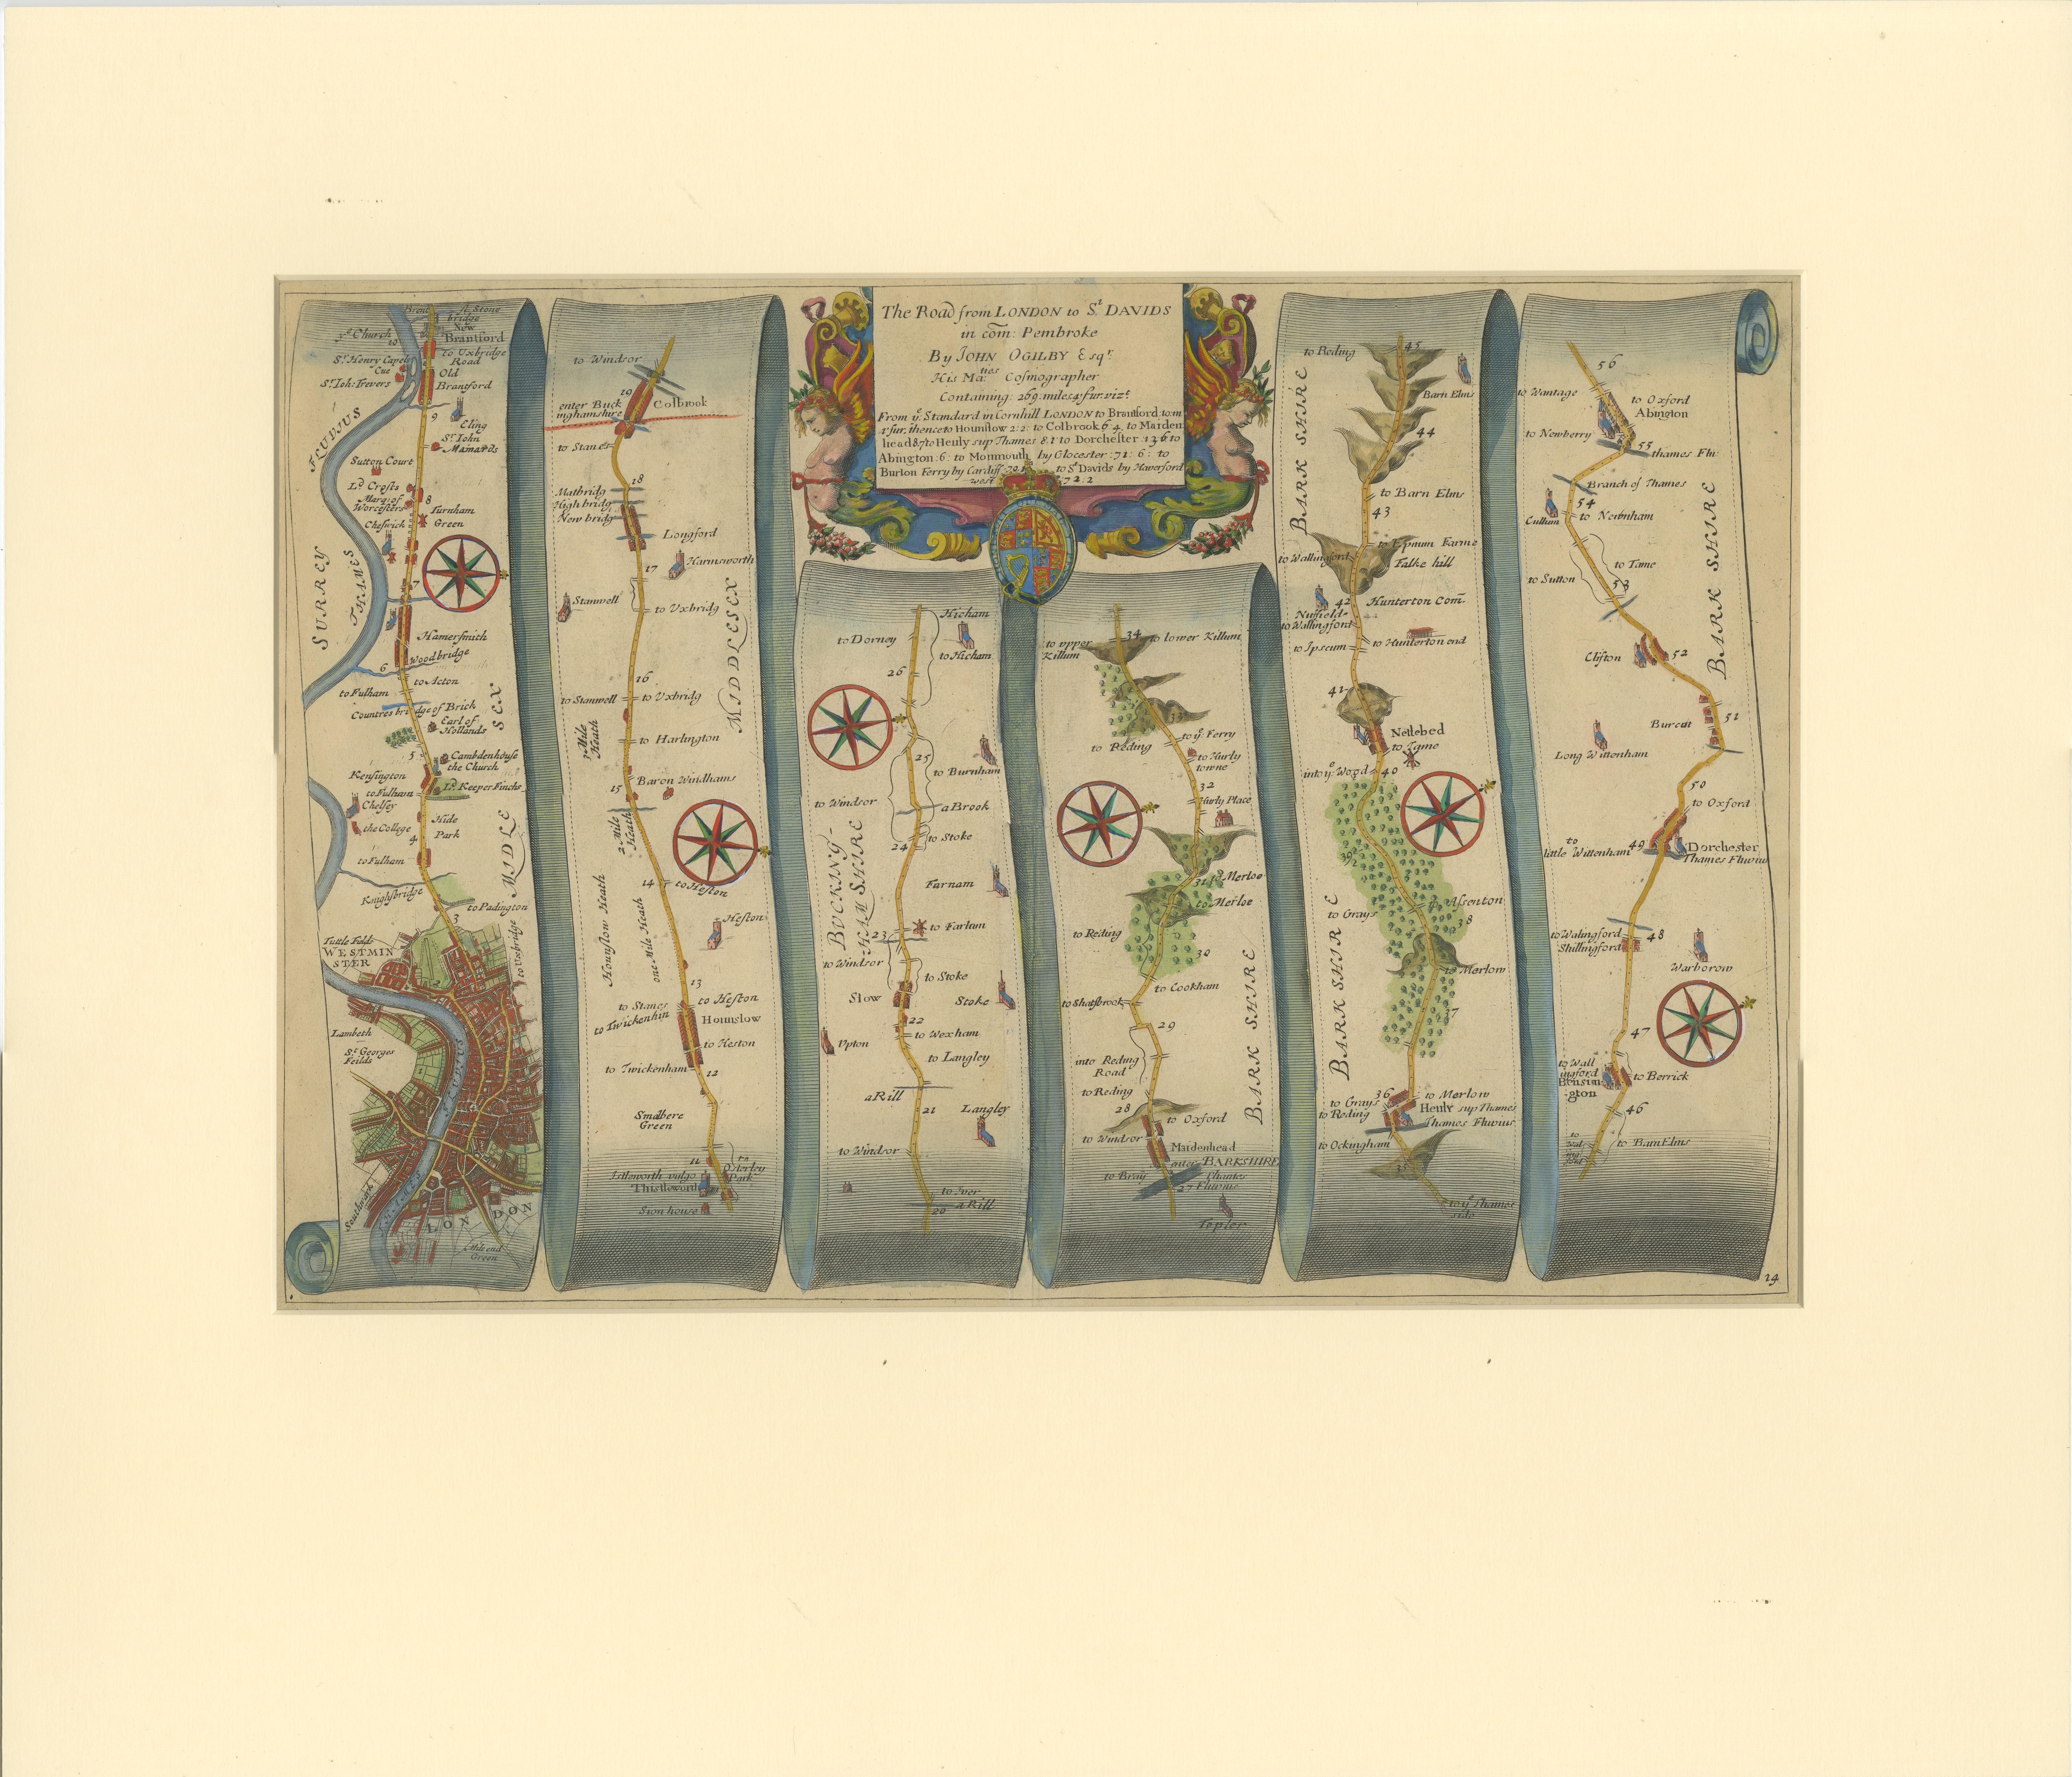 Antique map titled 'The Road from London to St. Davids in com: Pembroke (..)'. A strip map of the road from London to Bensington. The map is ornamented with numerous compass roses, and a decorative title cartouche. Originates from Ogilby's